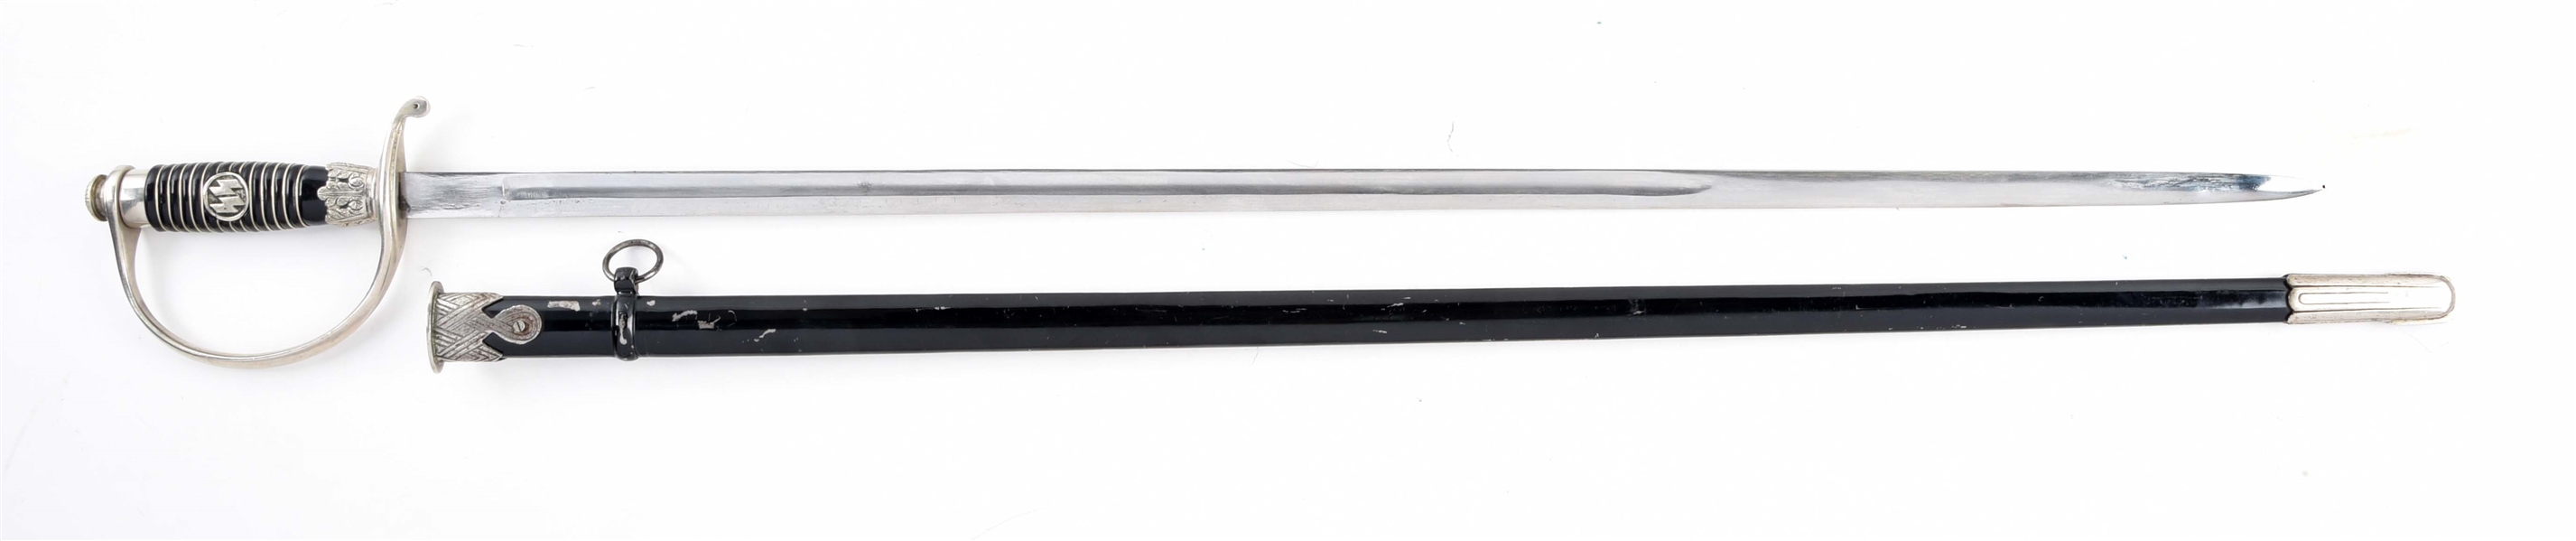 REPRODUCTION SS OFFICER SWORD WITH SCABBARD.